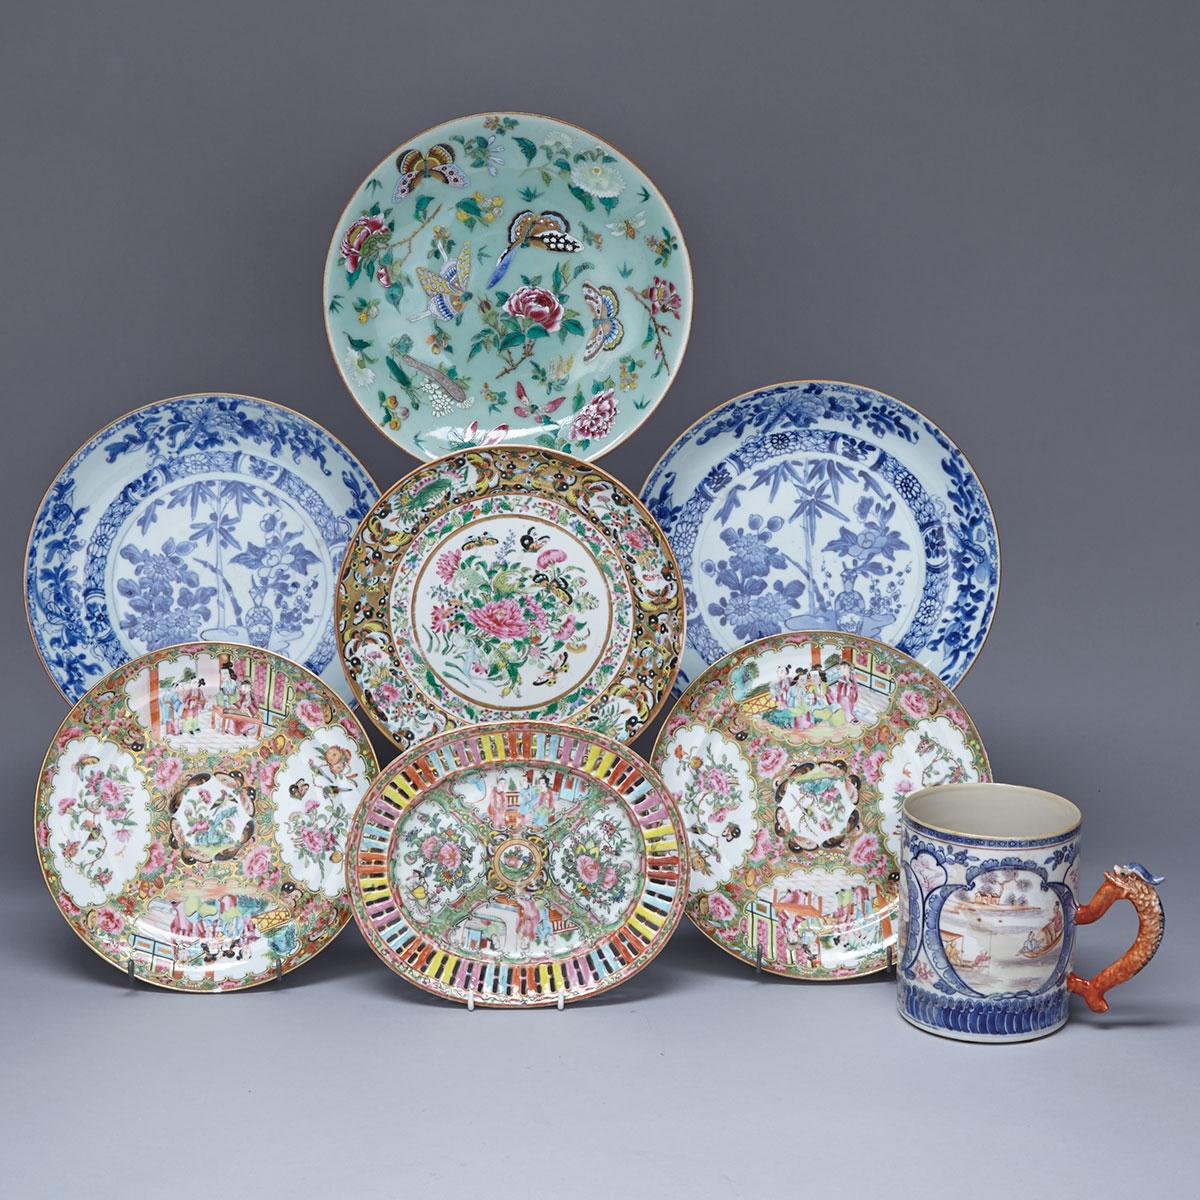 Two Export Blue and White Plates, 18th Century